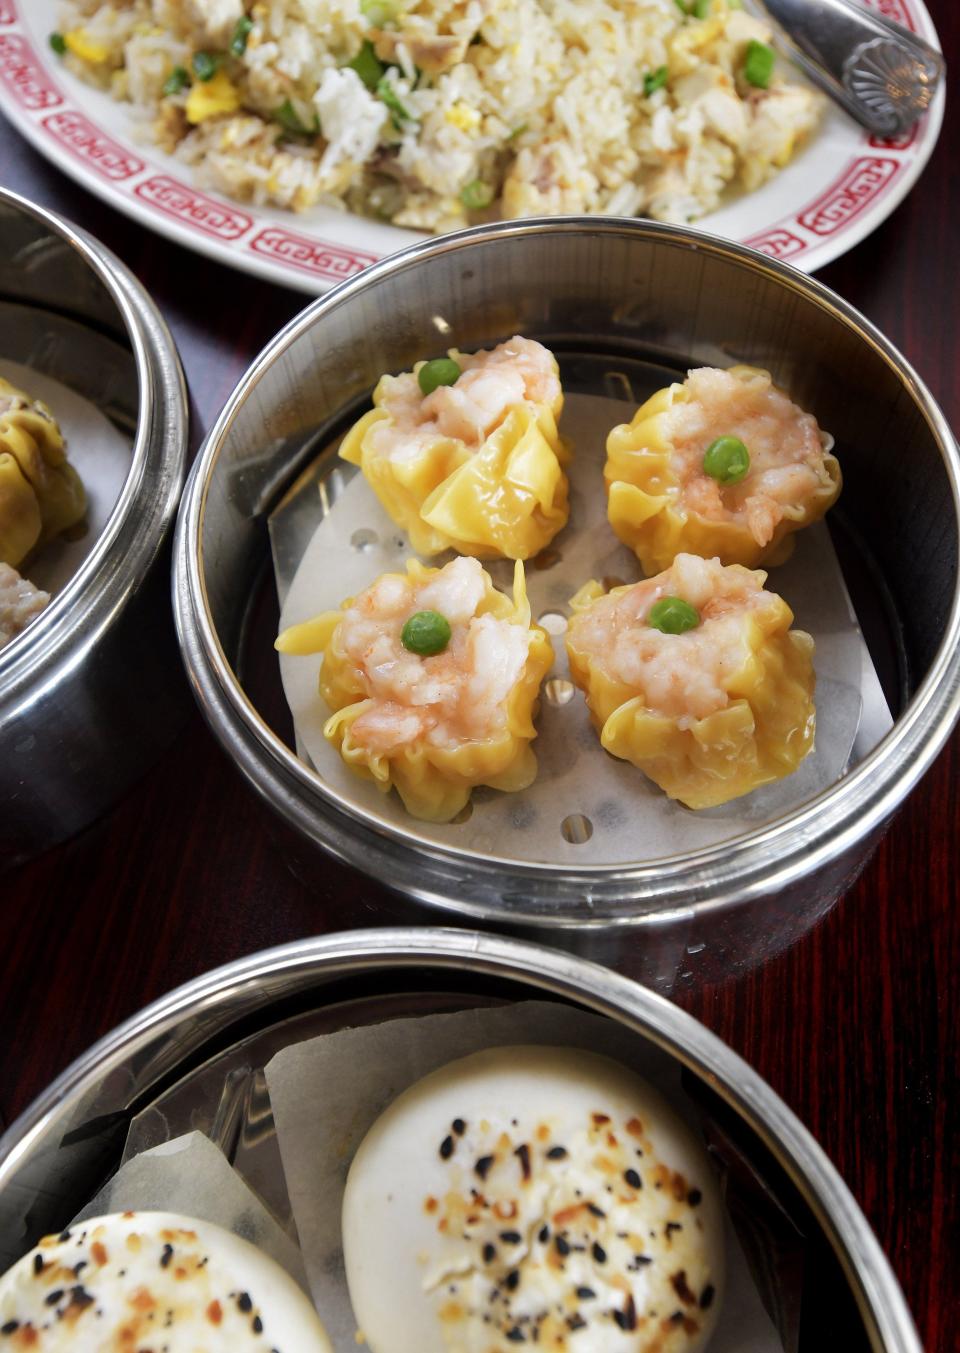 Shrimp shumai dumplings topped with English peas surrounded by other menu offerings Aug. 3 at Lucky Cat, a new dim sum restaurant in Mandarin. Lucky Cat Dim Sum is preparing for its Aug. 8 soft opening at 10550 Old St. Augustine Road, Unit 28.